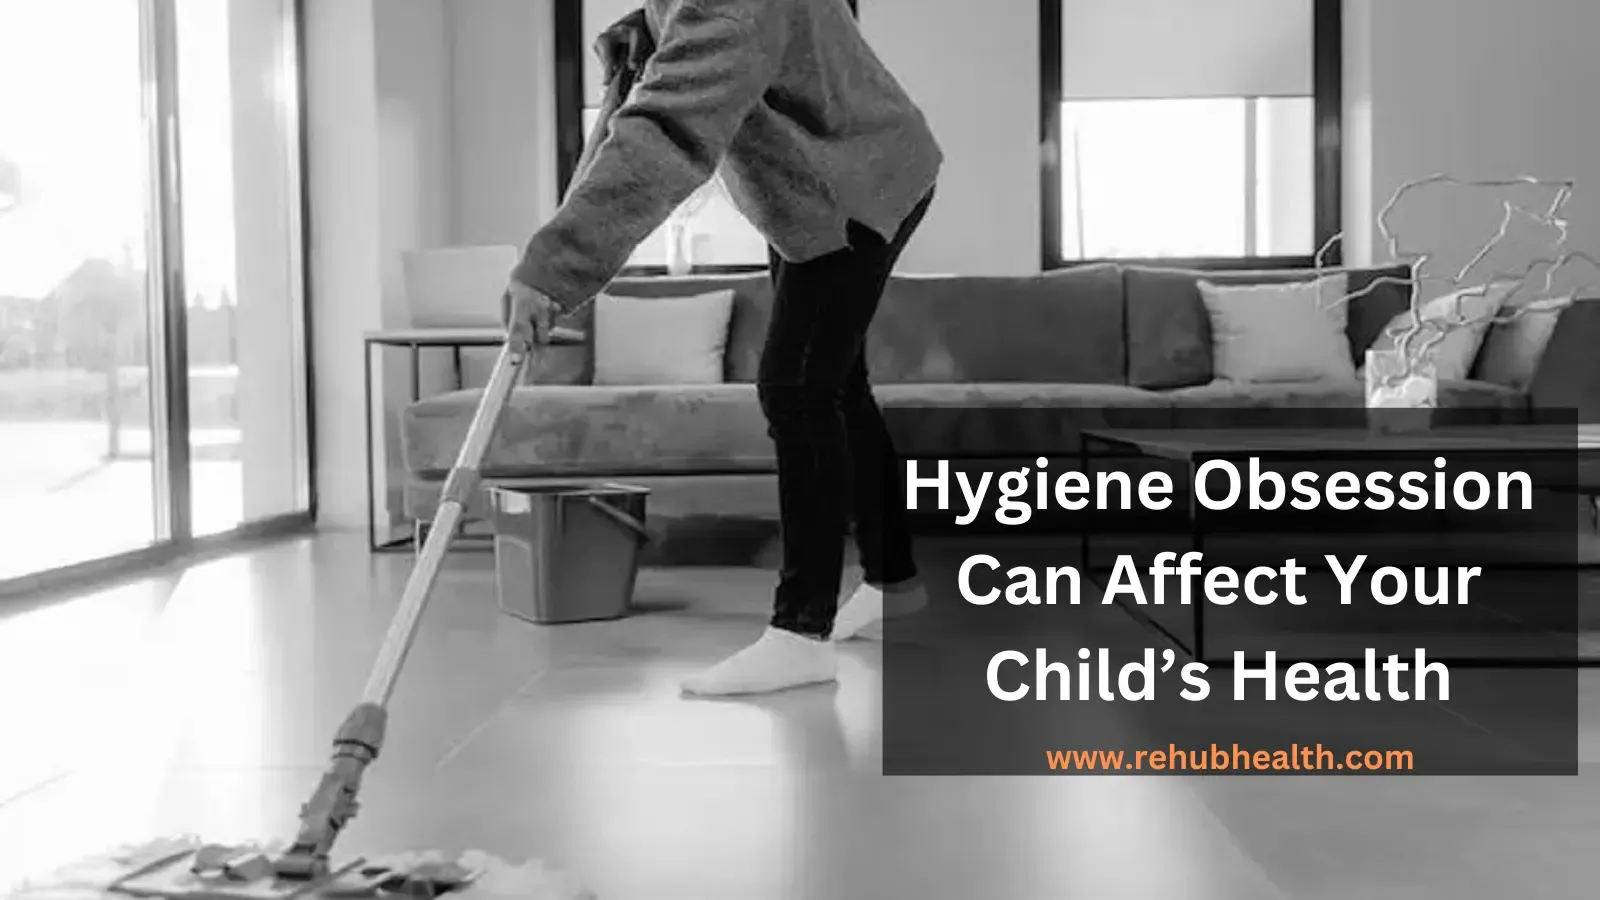 Hygiene Obsession Can Affect Your Child’s Health